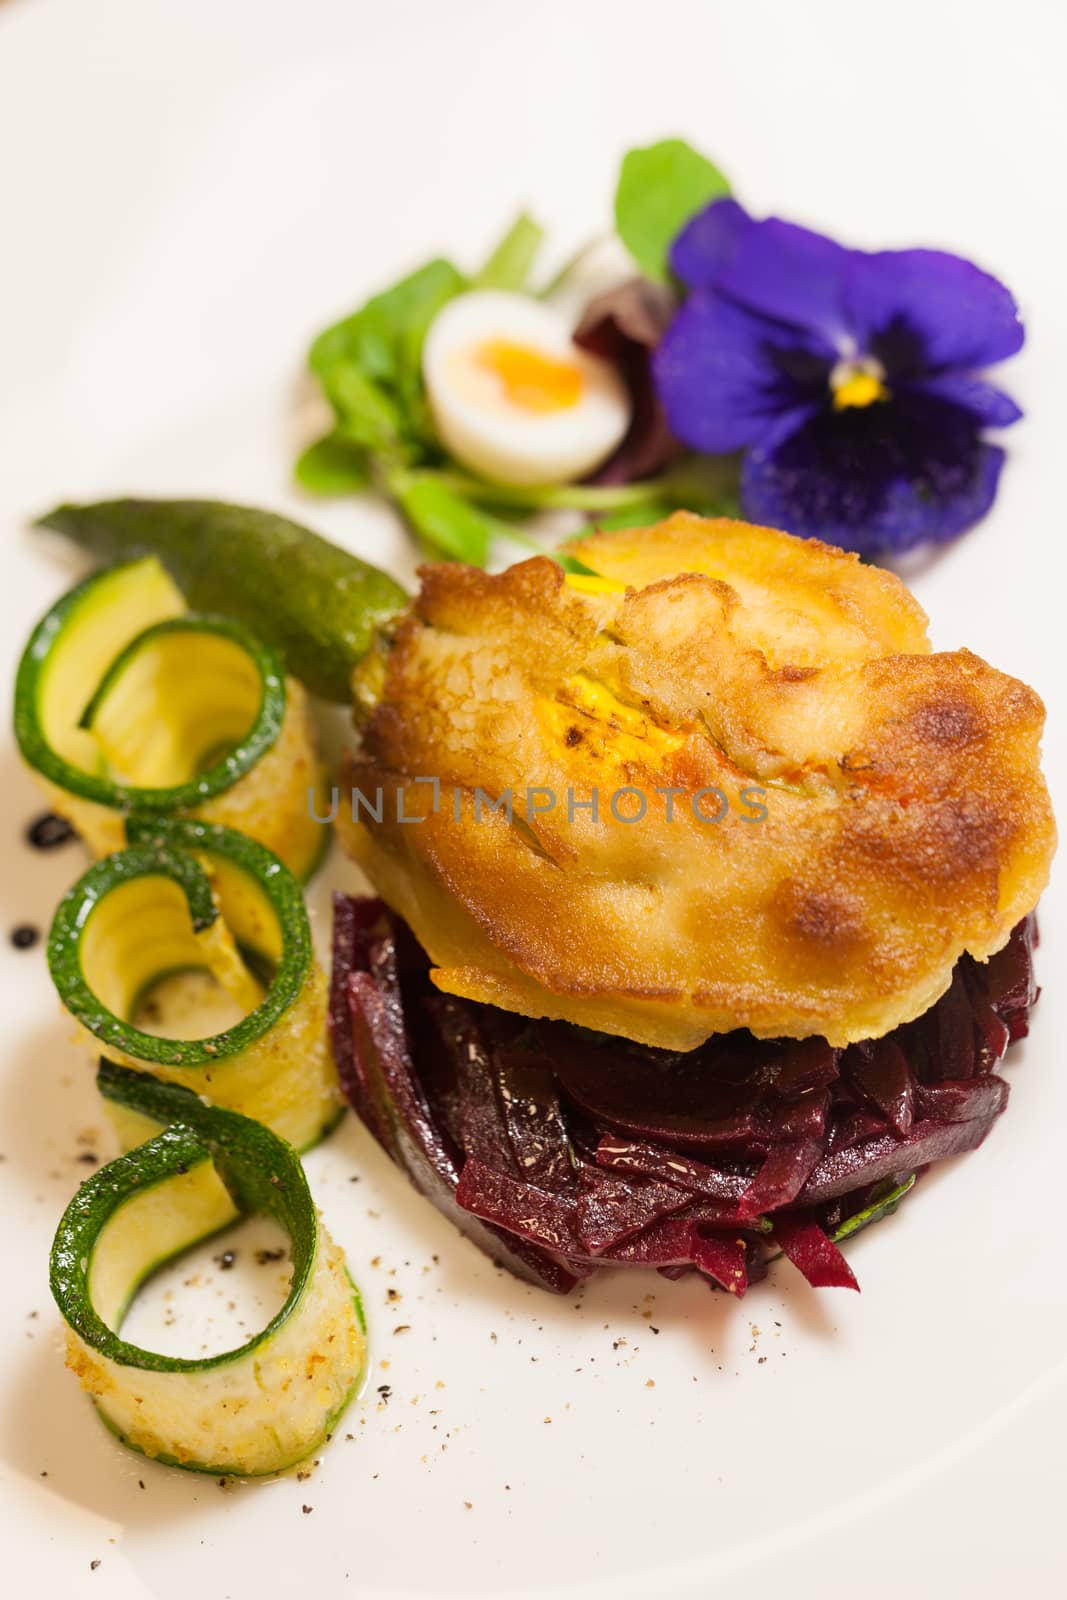 Delicious gourmet plate featuring biscuit sandwich with beets, zucchini strips and pansy garnish over white background